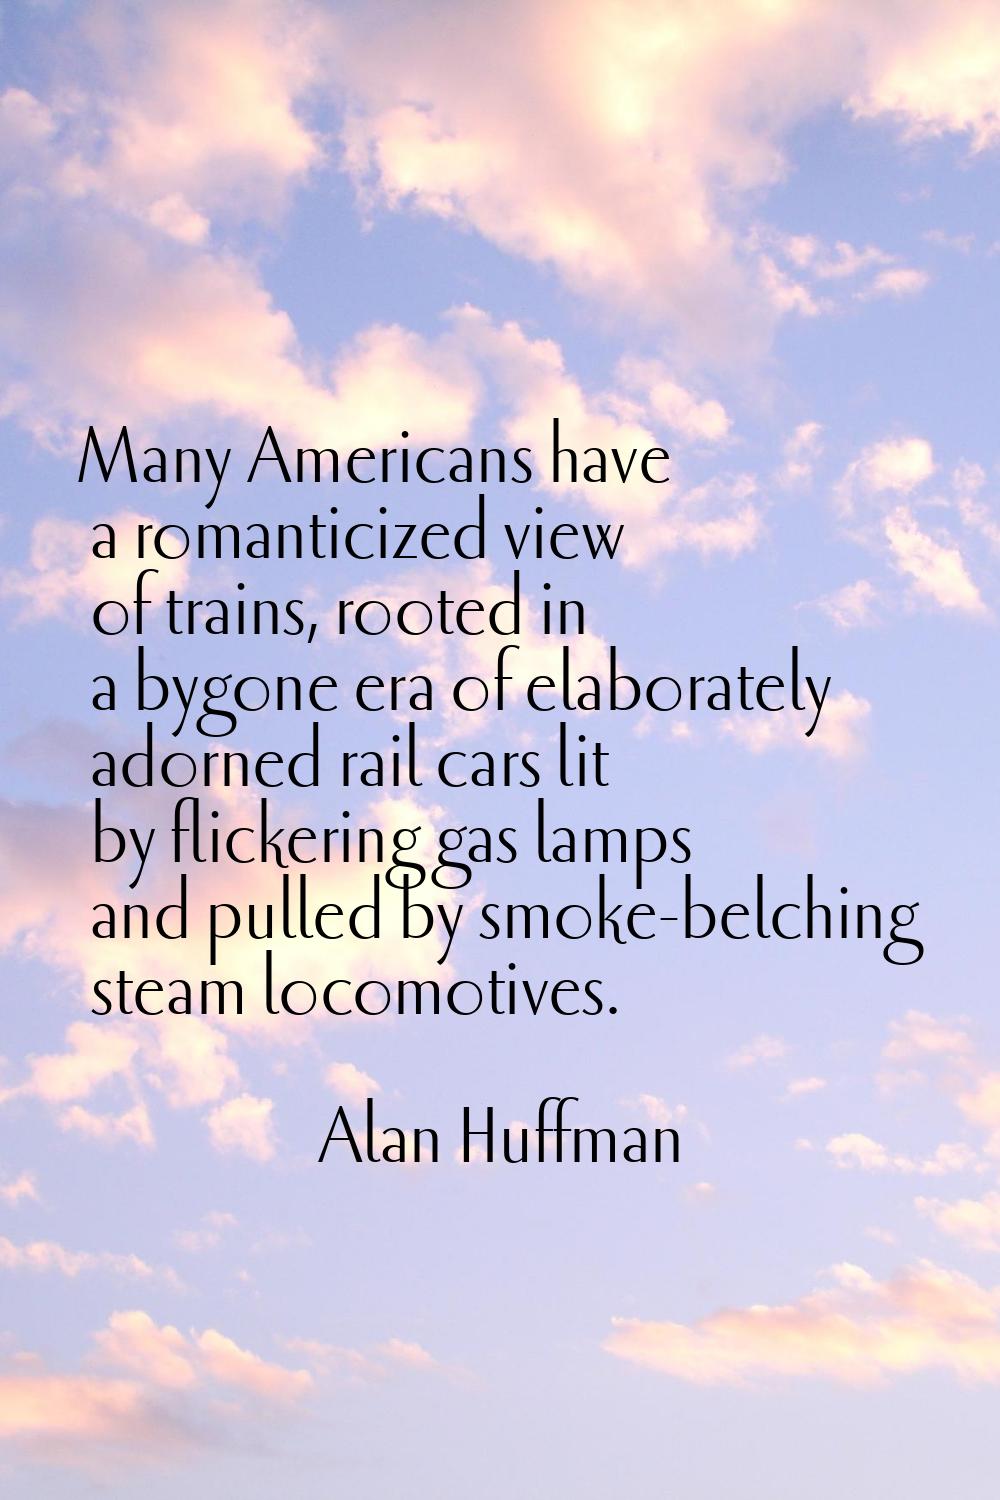 Many Americans have a romanticized view of trains, rooted in a bygone era of elaborately adorned ra